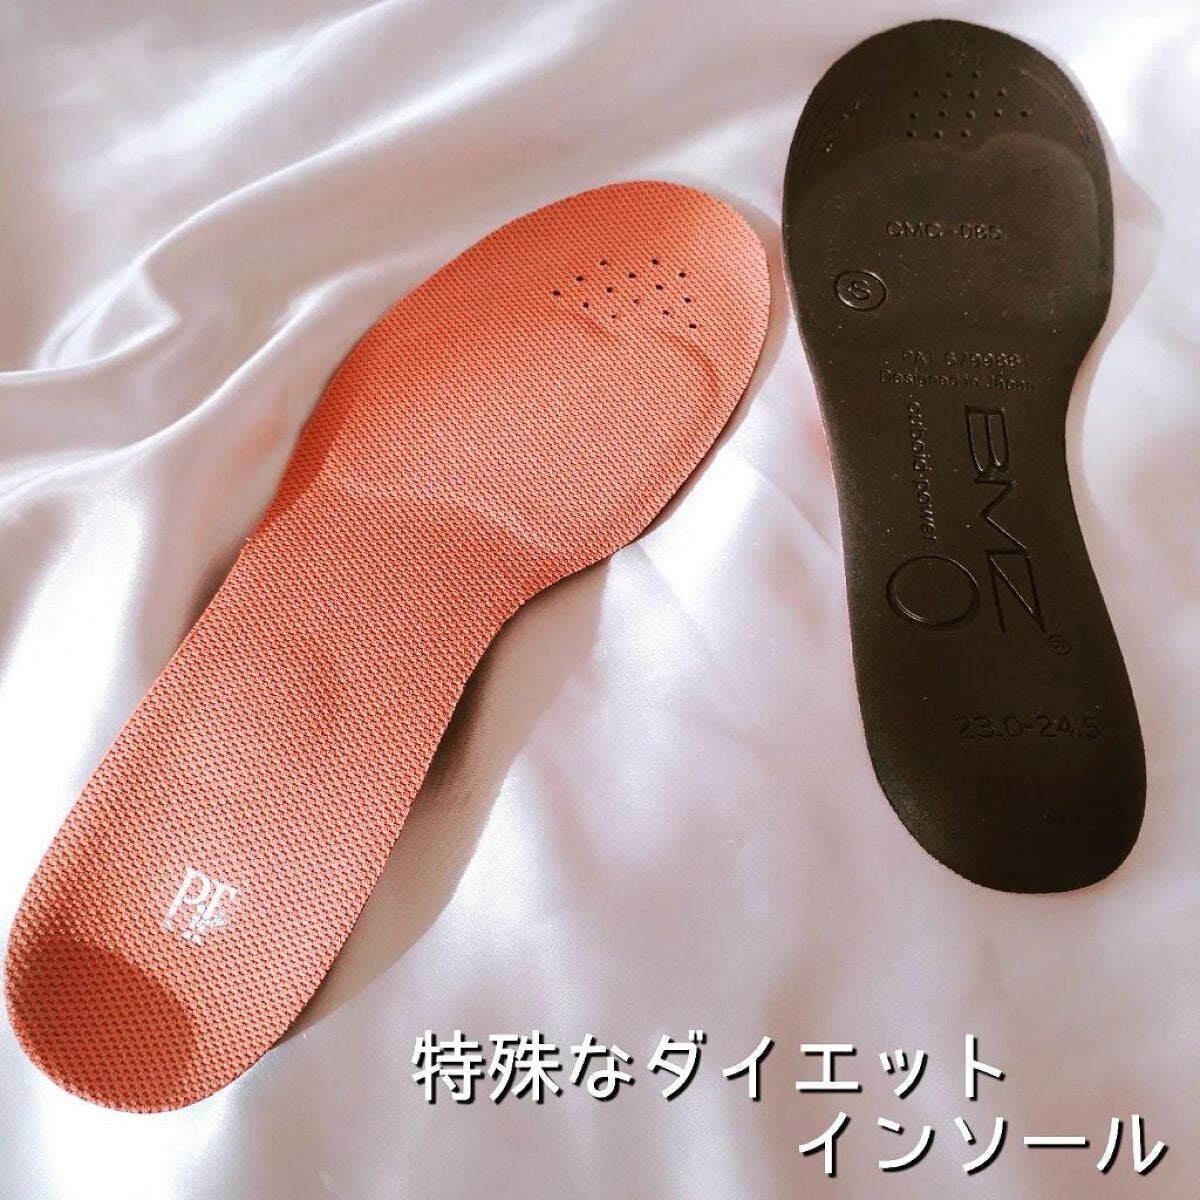 【Pitsole ピットソール】 S  2枚ダイエットシューズ ダイエットソール